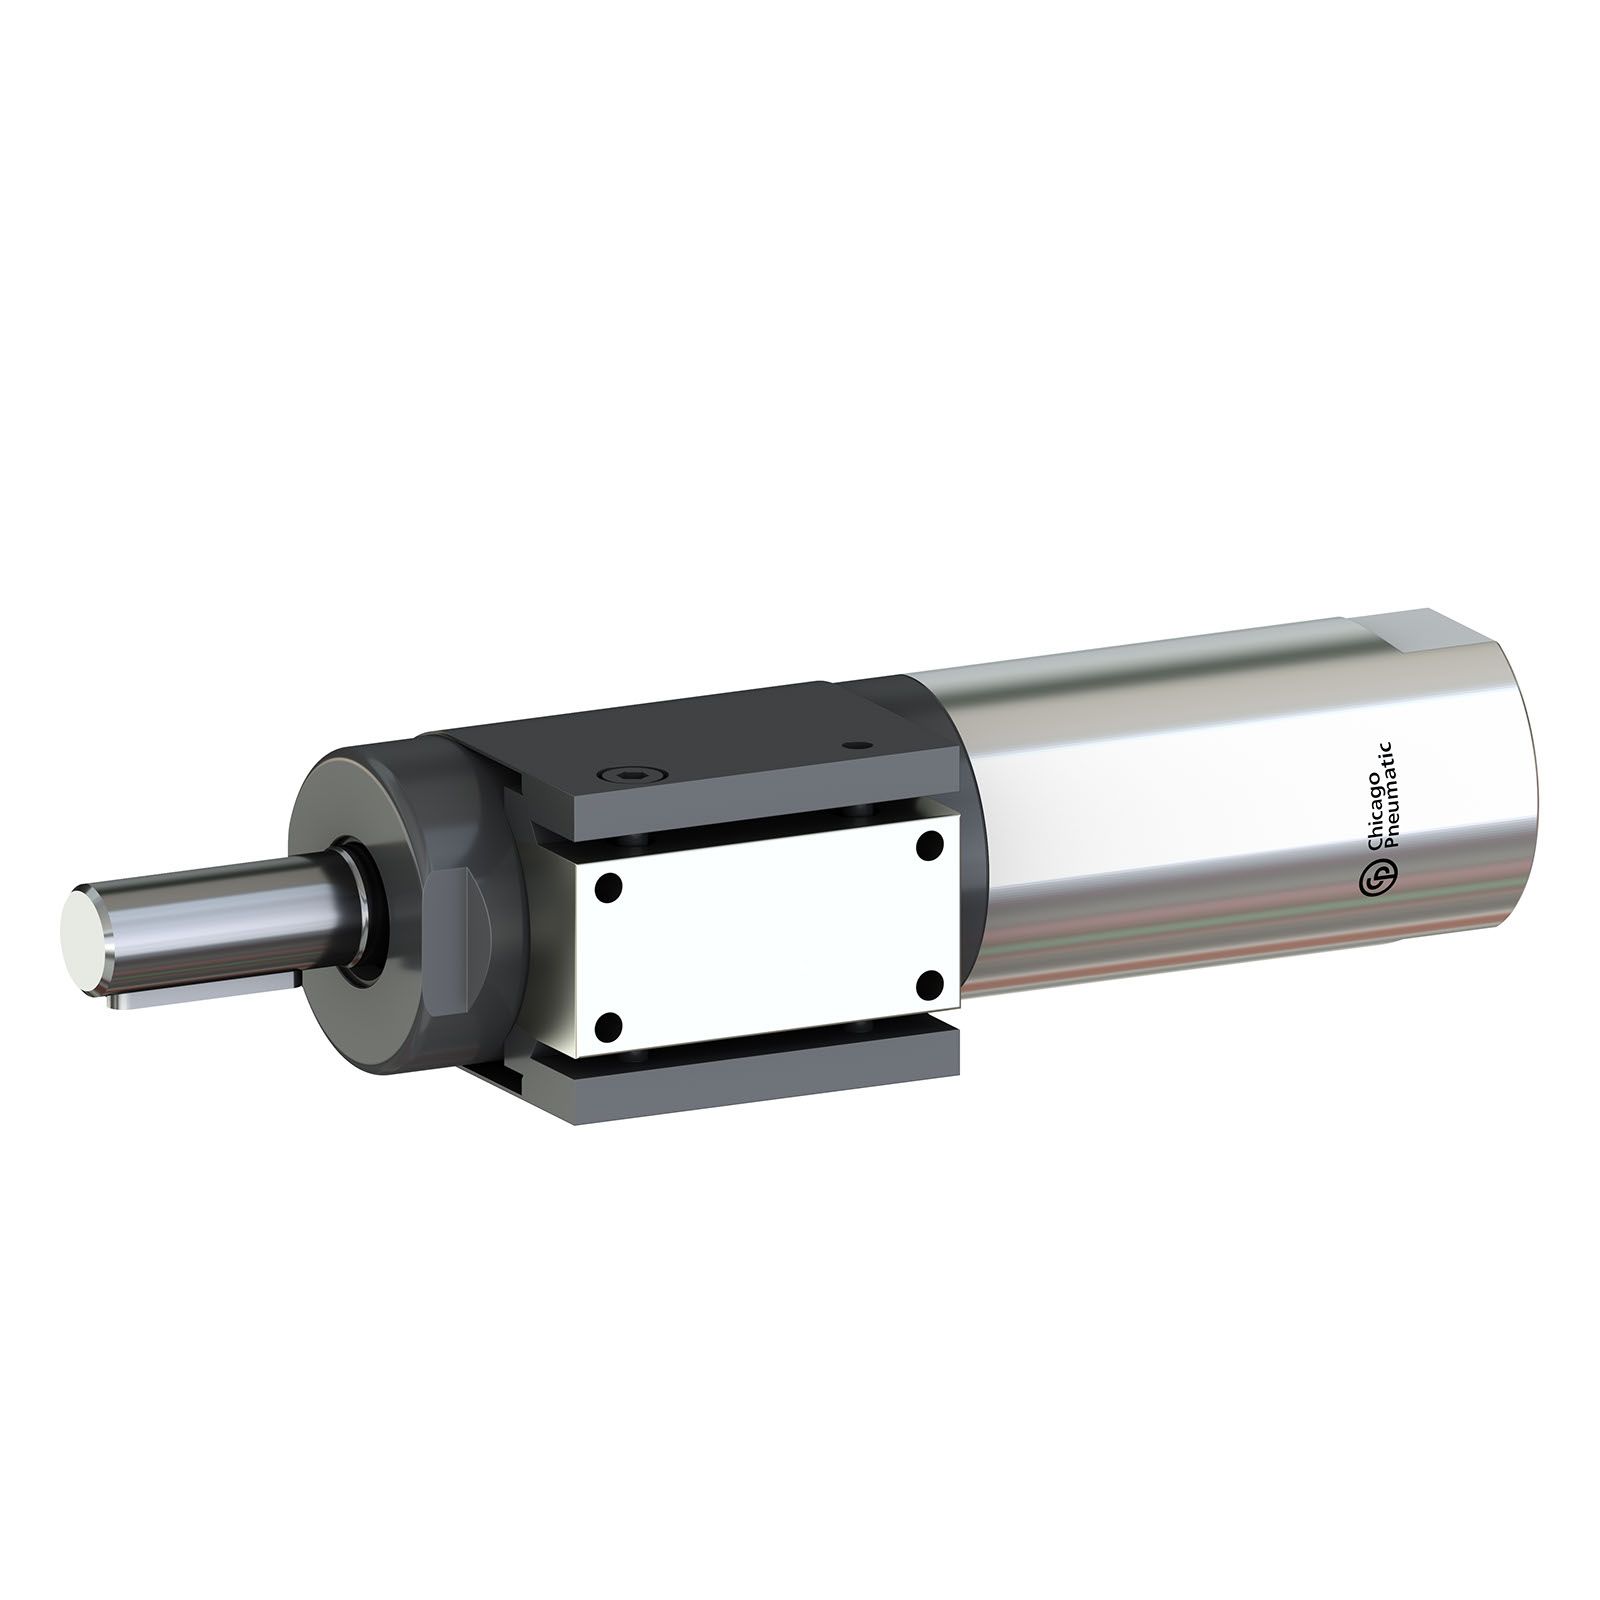 MOUNTING FOOT M/MR84 LOW SPEED / M180 foto de producto